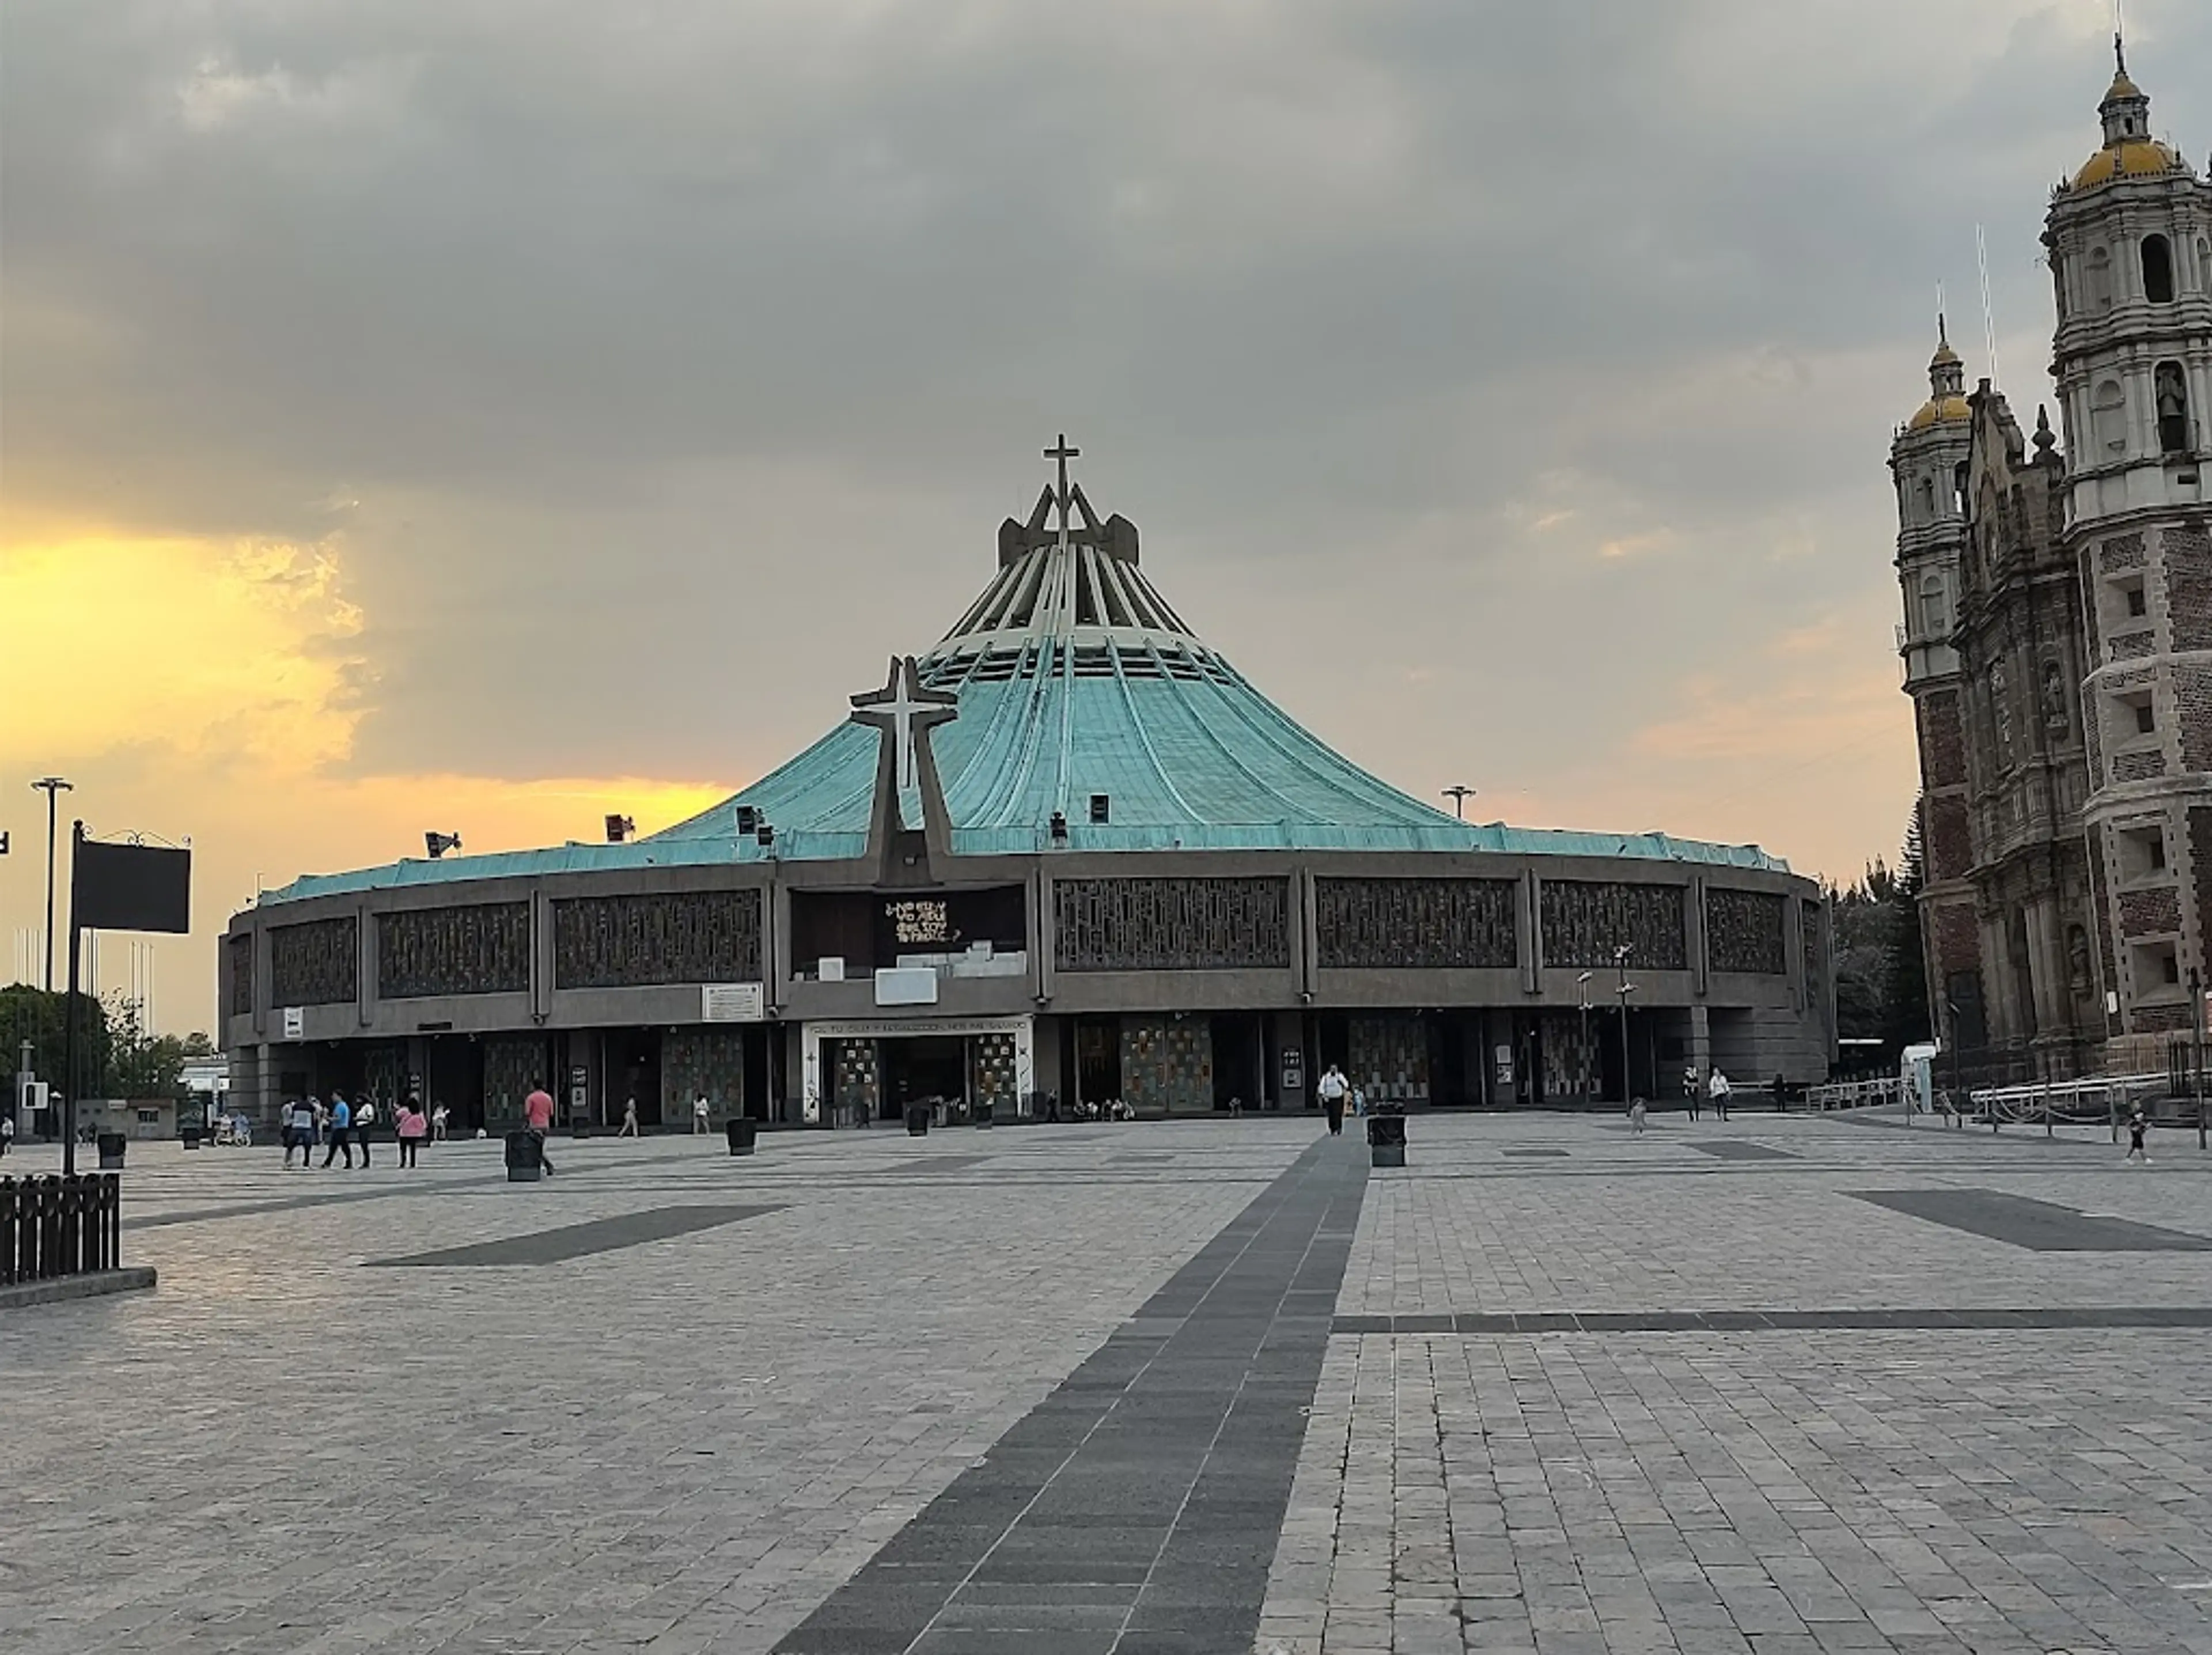 Basilica of Our Lady of Guadalupe